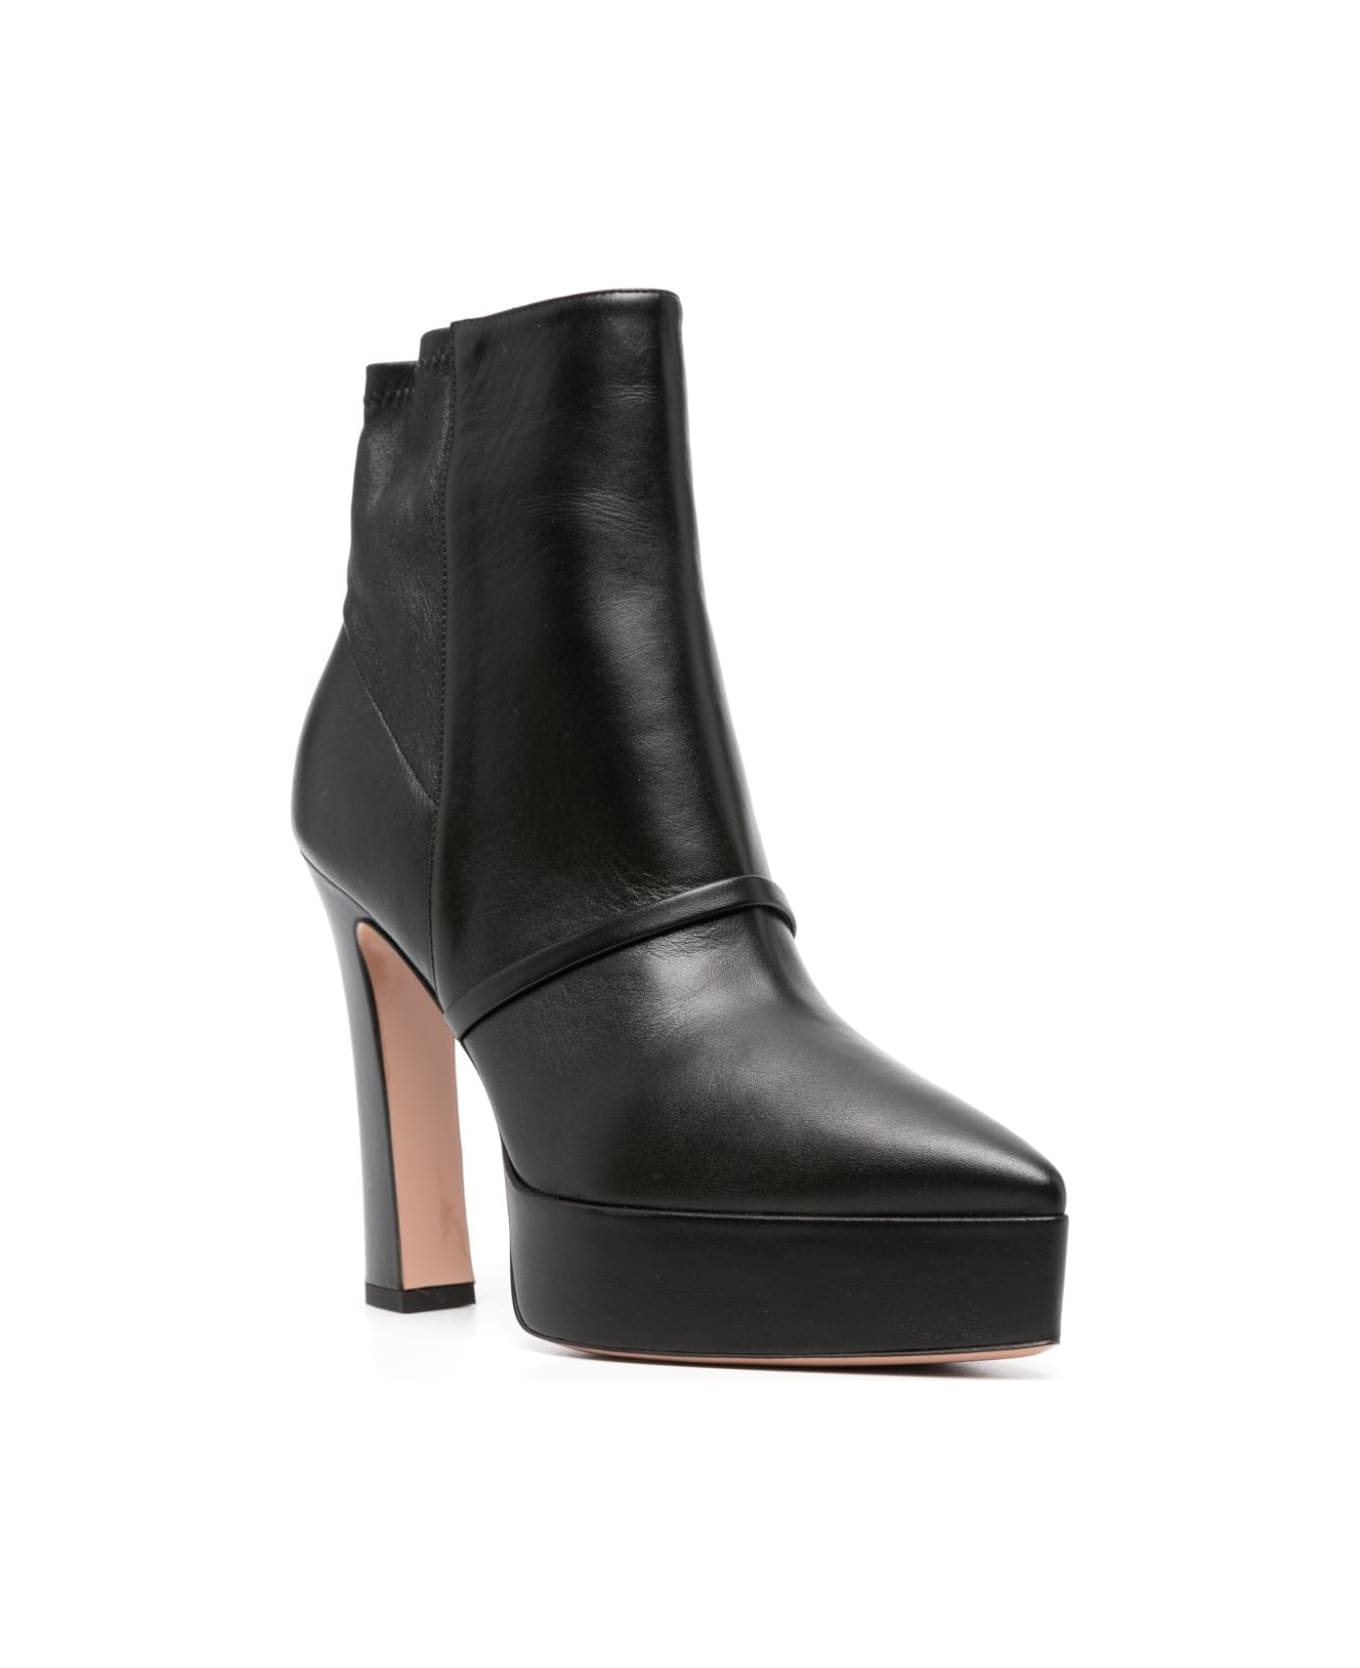 Malone Souliers Rue 125 High Heel Ankle Boots - Black  Black